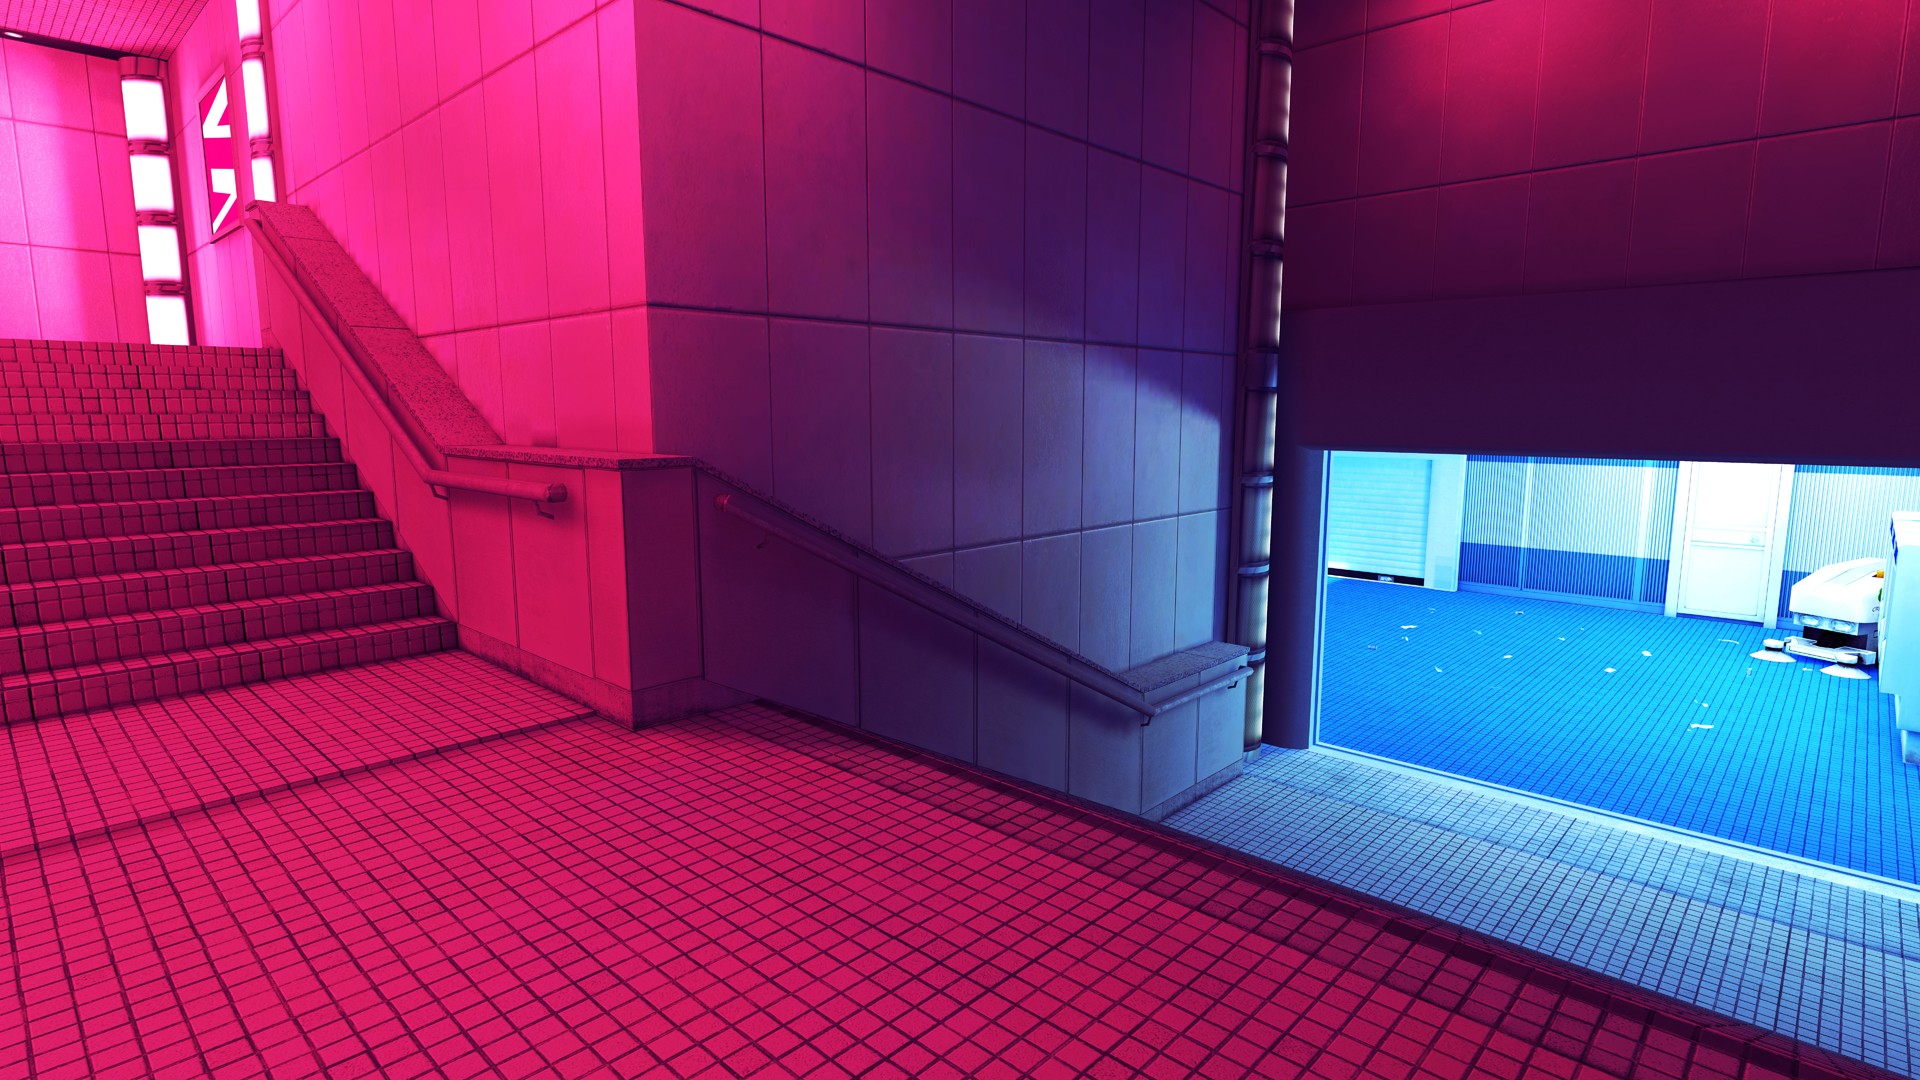 stairs, Contrast, Architecture, Blue, Red, Building, Mirrors Edge Wallpaper